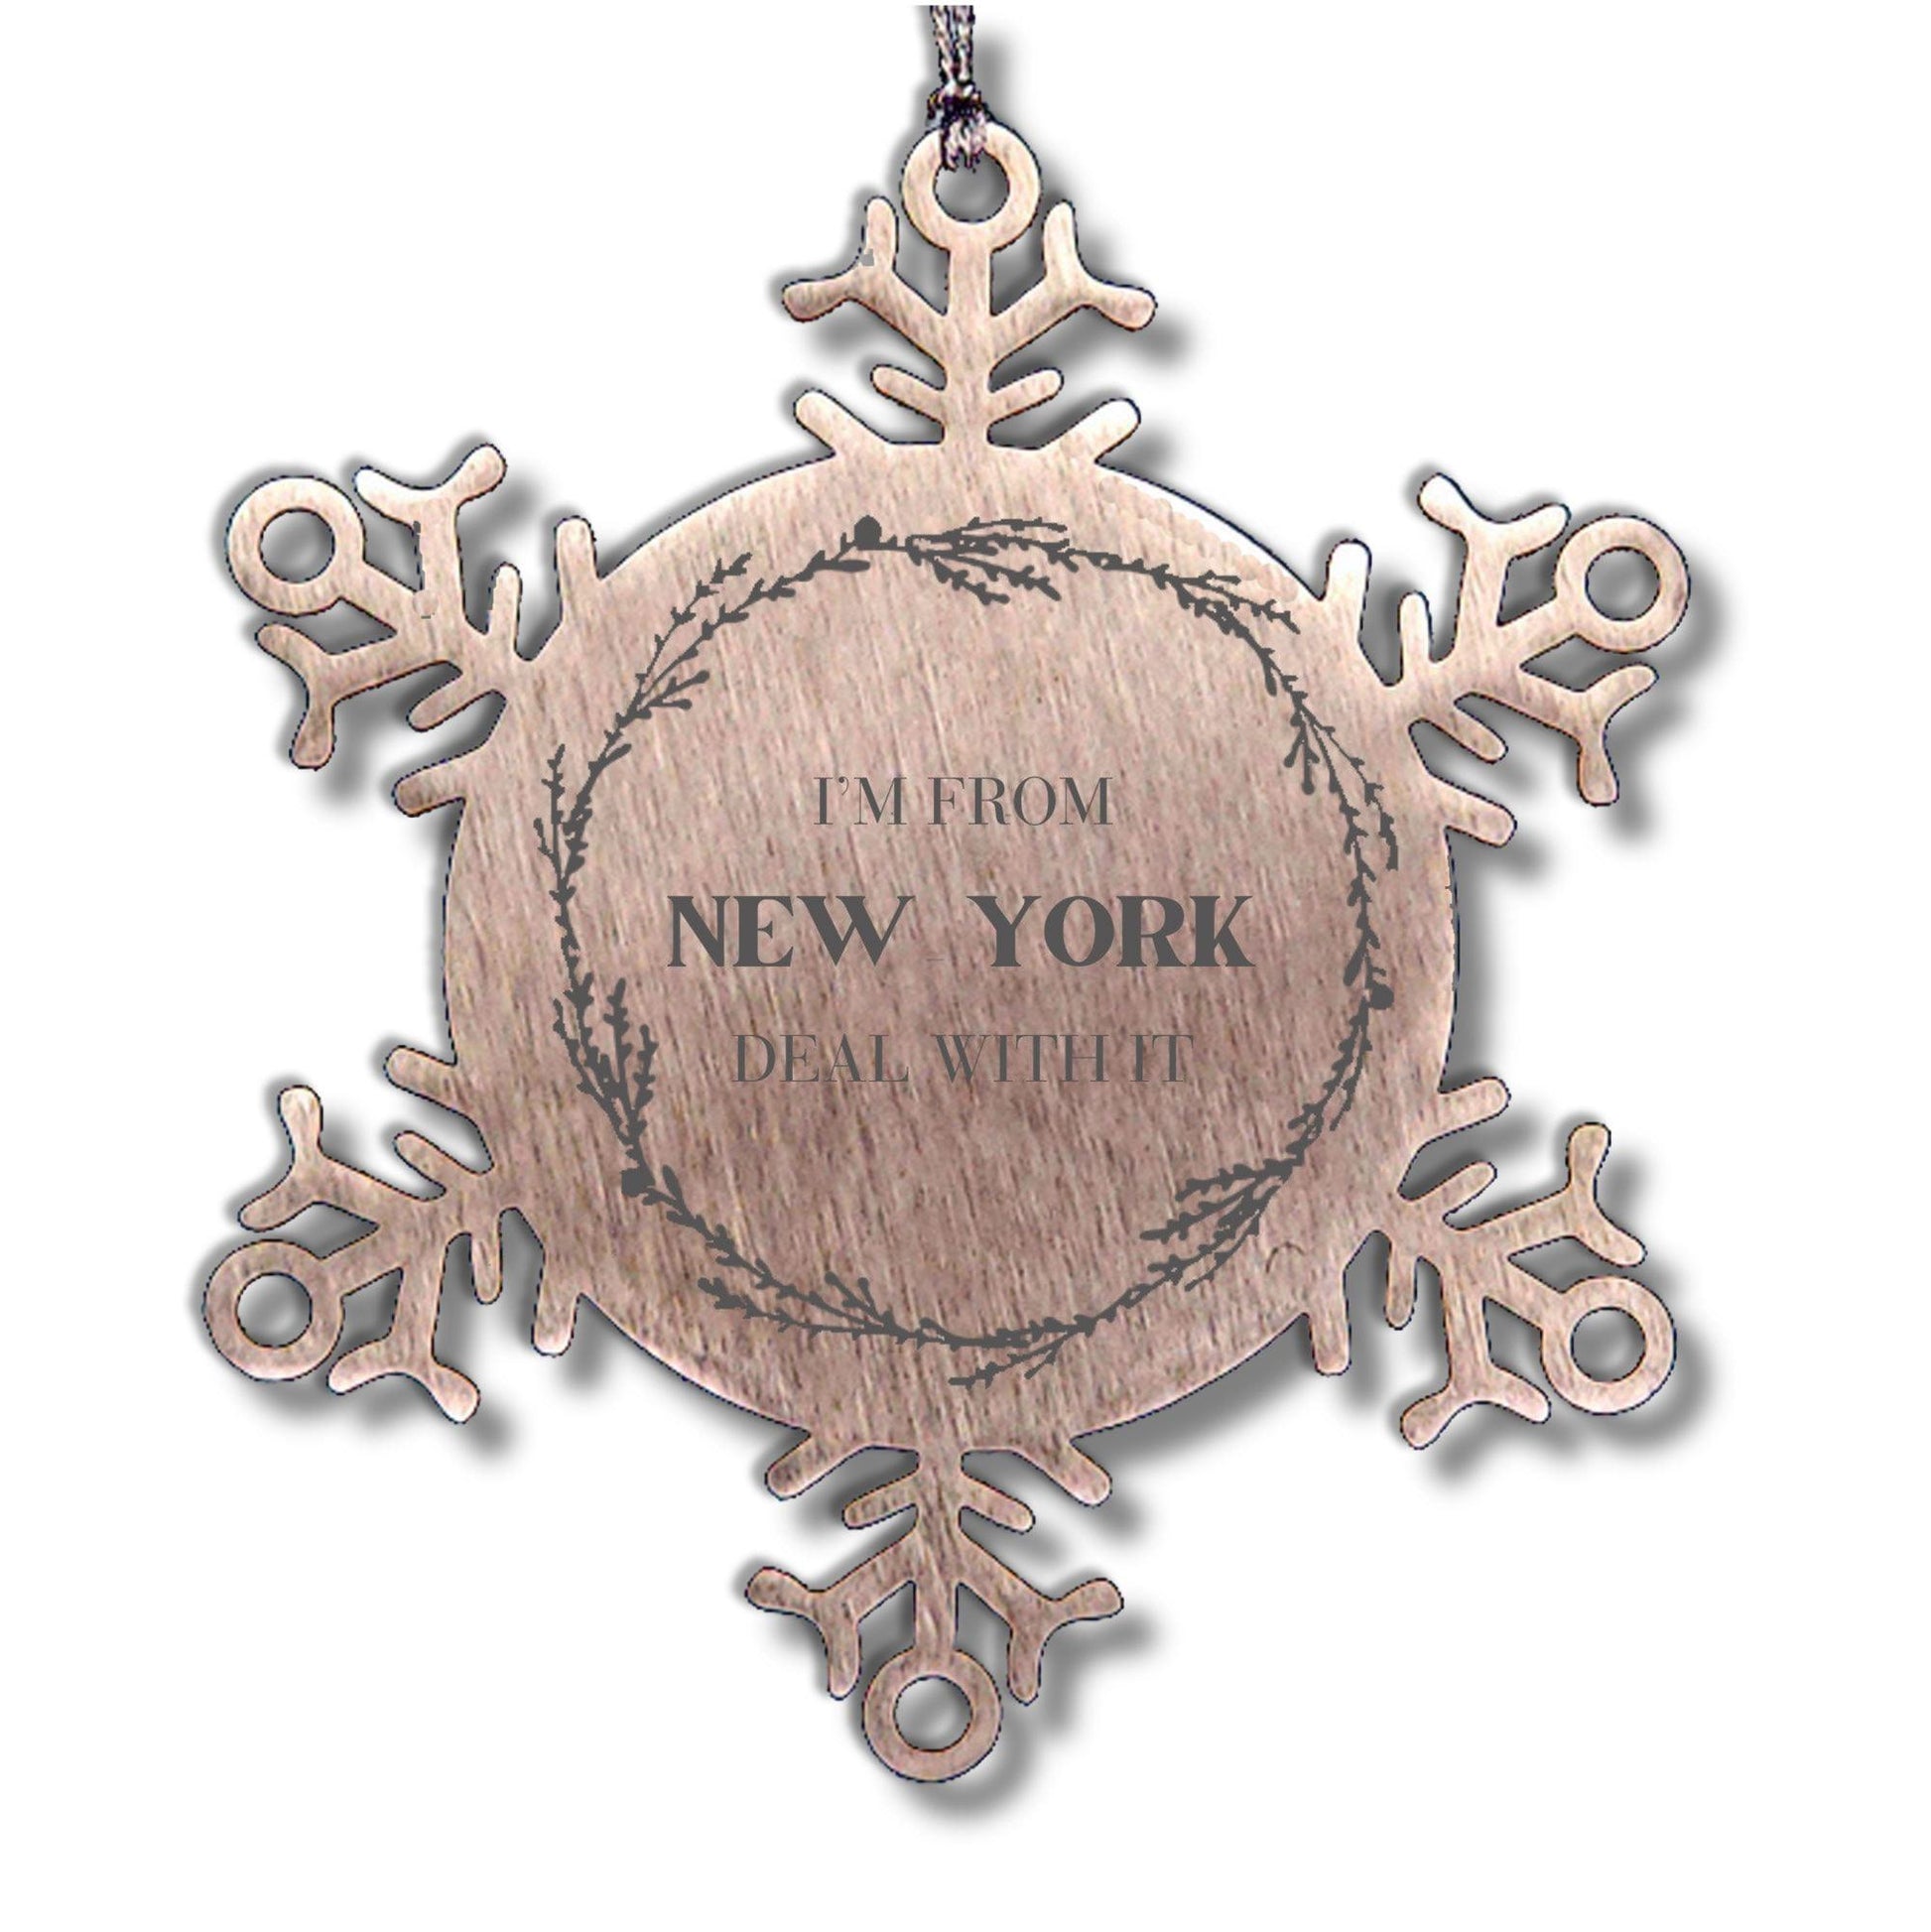 I'm from New York, Deal with it, Proud New York State Ornament Gifts, Snowflake Ornament Gift Idea, Christmas Gifts for Family, Coworkers, Colleague - Mallard Moon Gift Shop